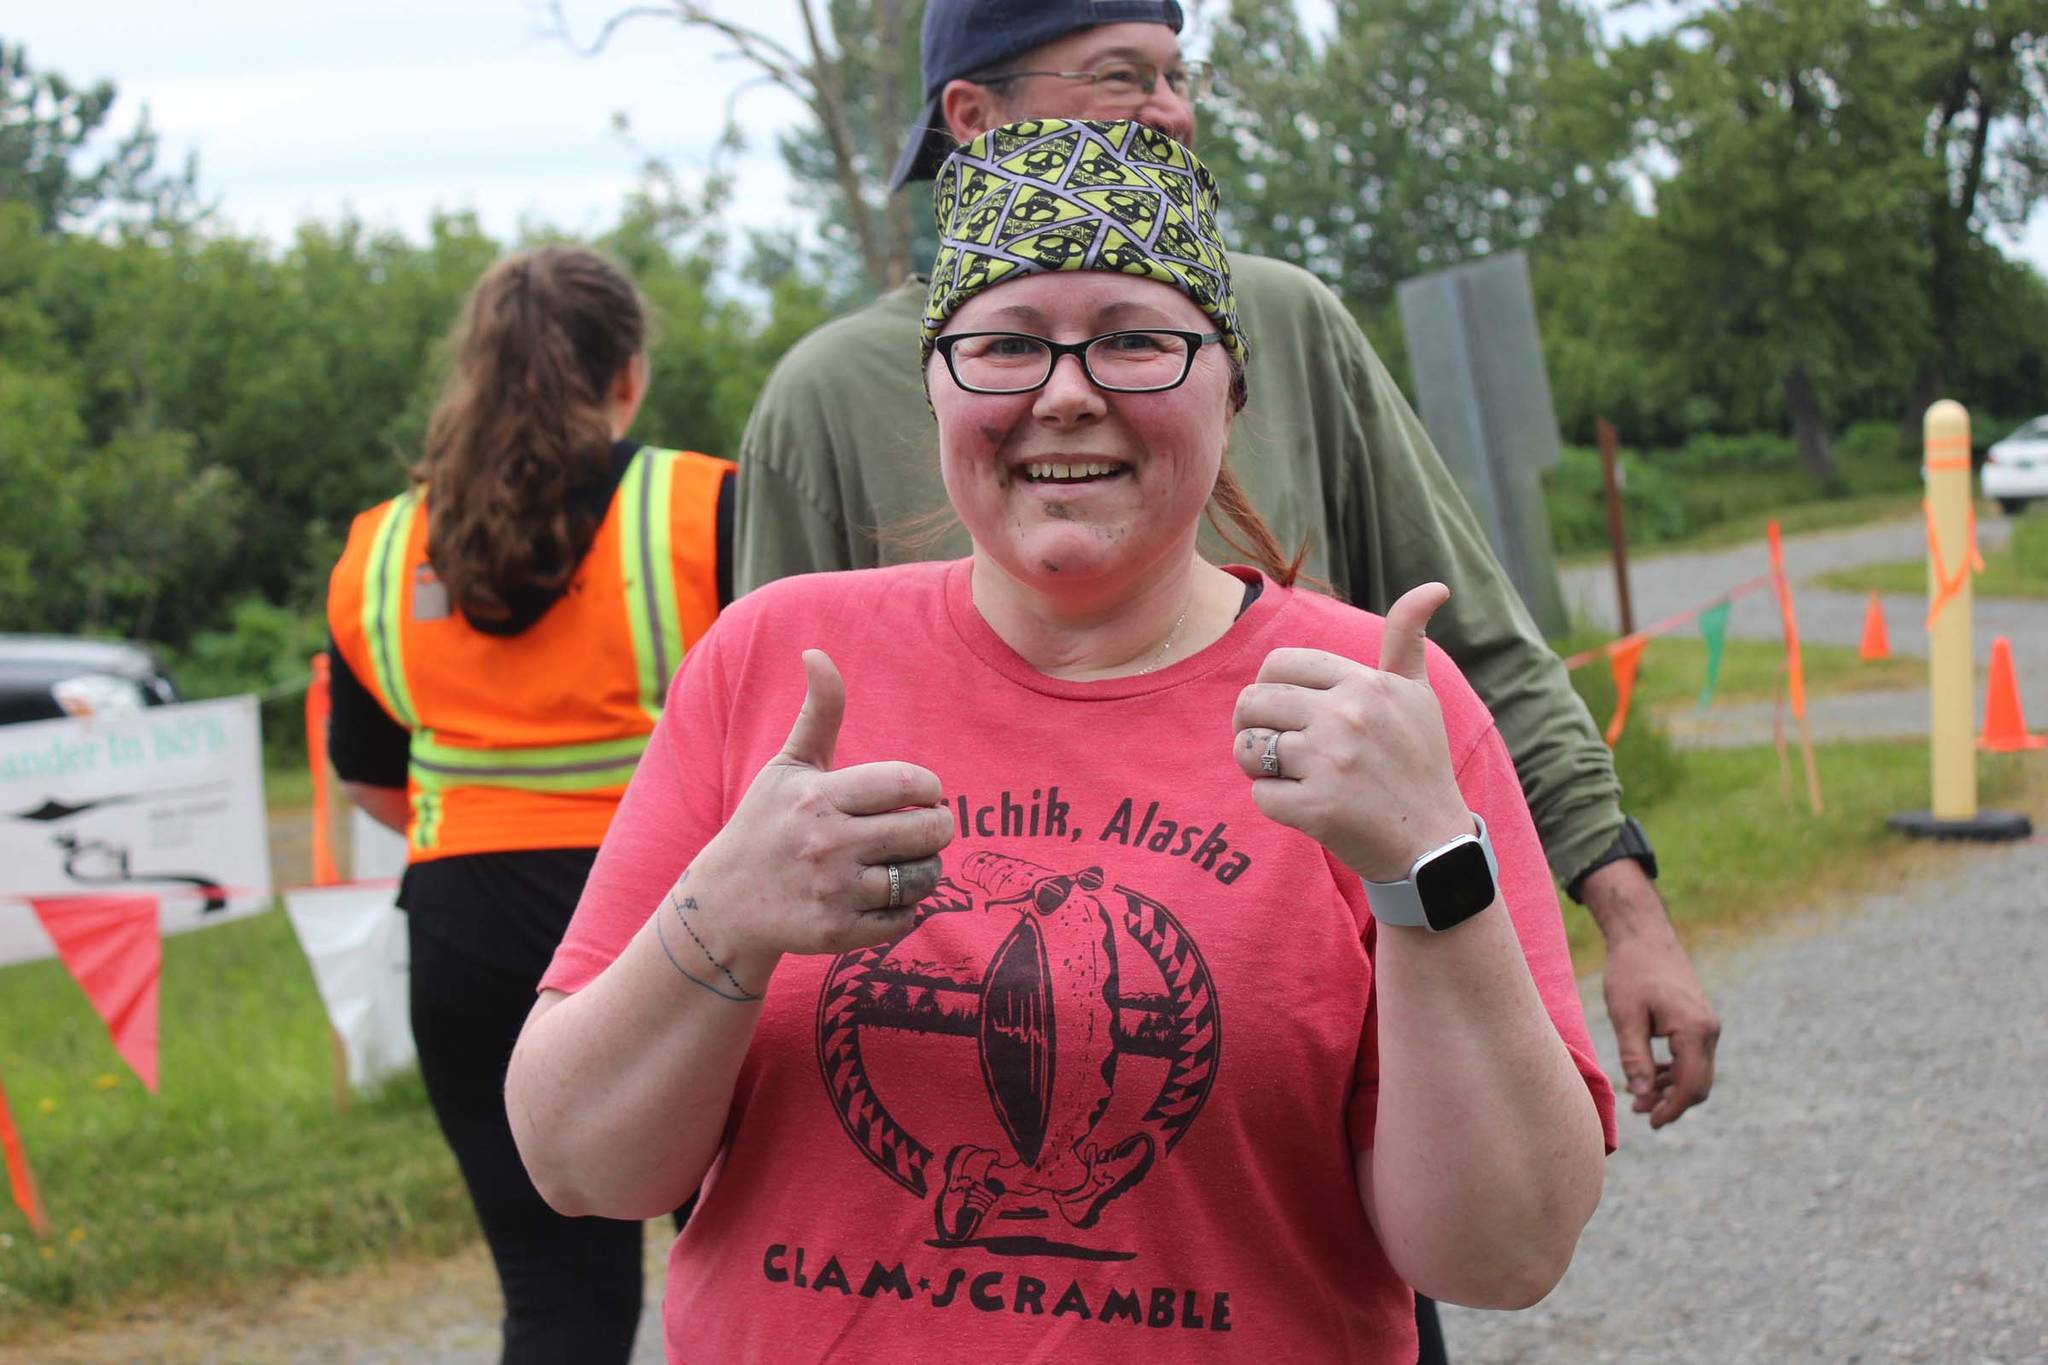 Starla Franklin gives a thumbs-up after crossing the finish line of the 2019 5K Clam Scramble on Saturday, June 15, 2019, in Ninilchik, Alaska. (Photo by McKibben Jackinsky)